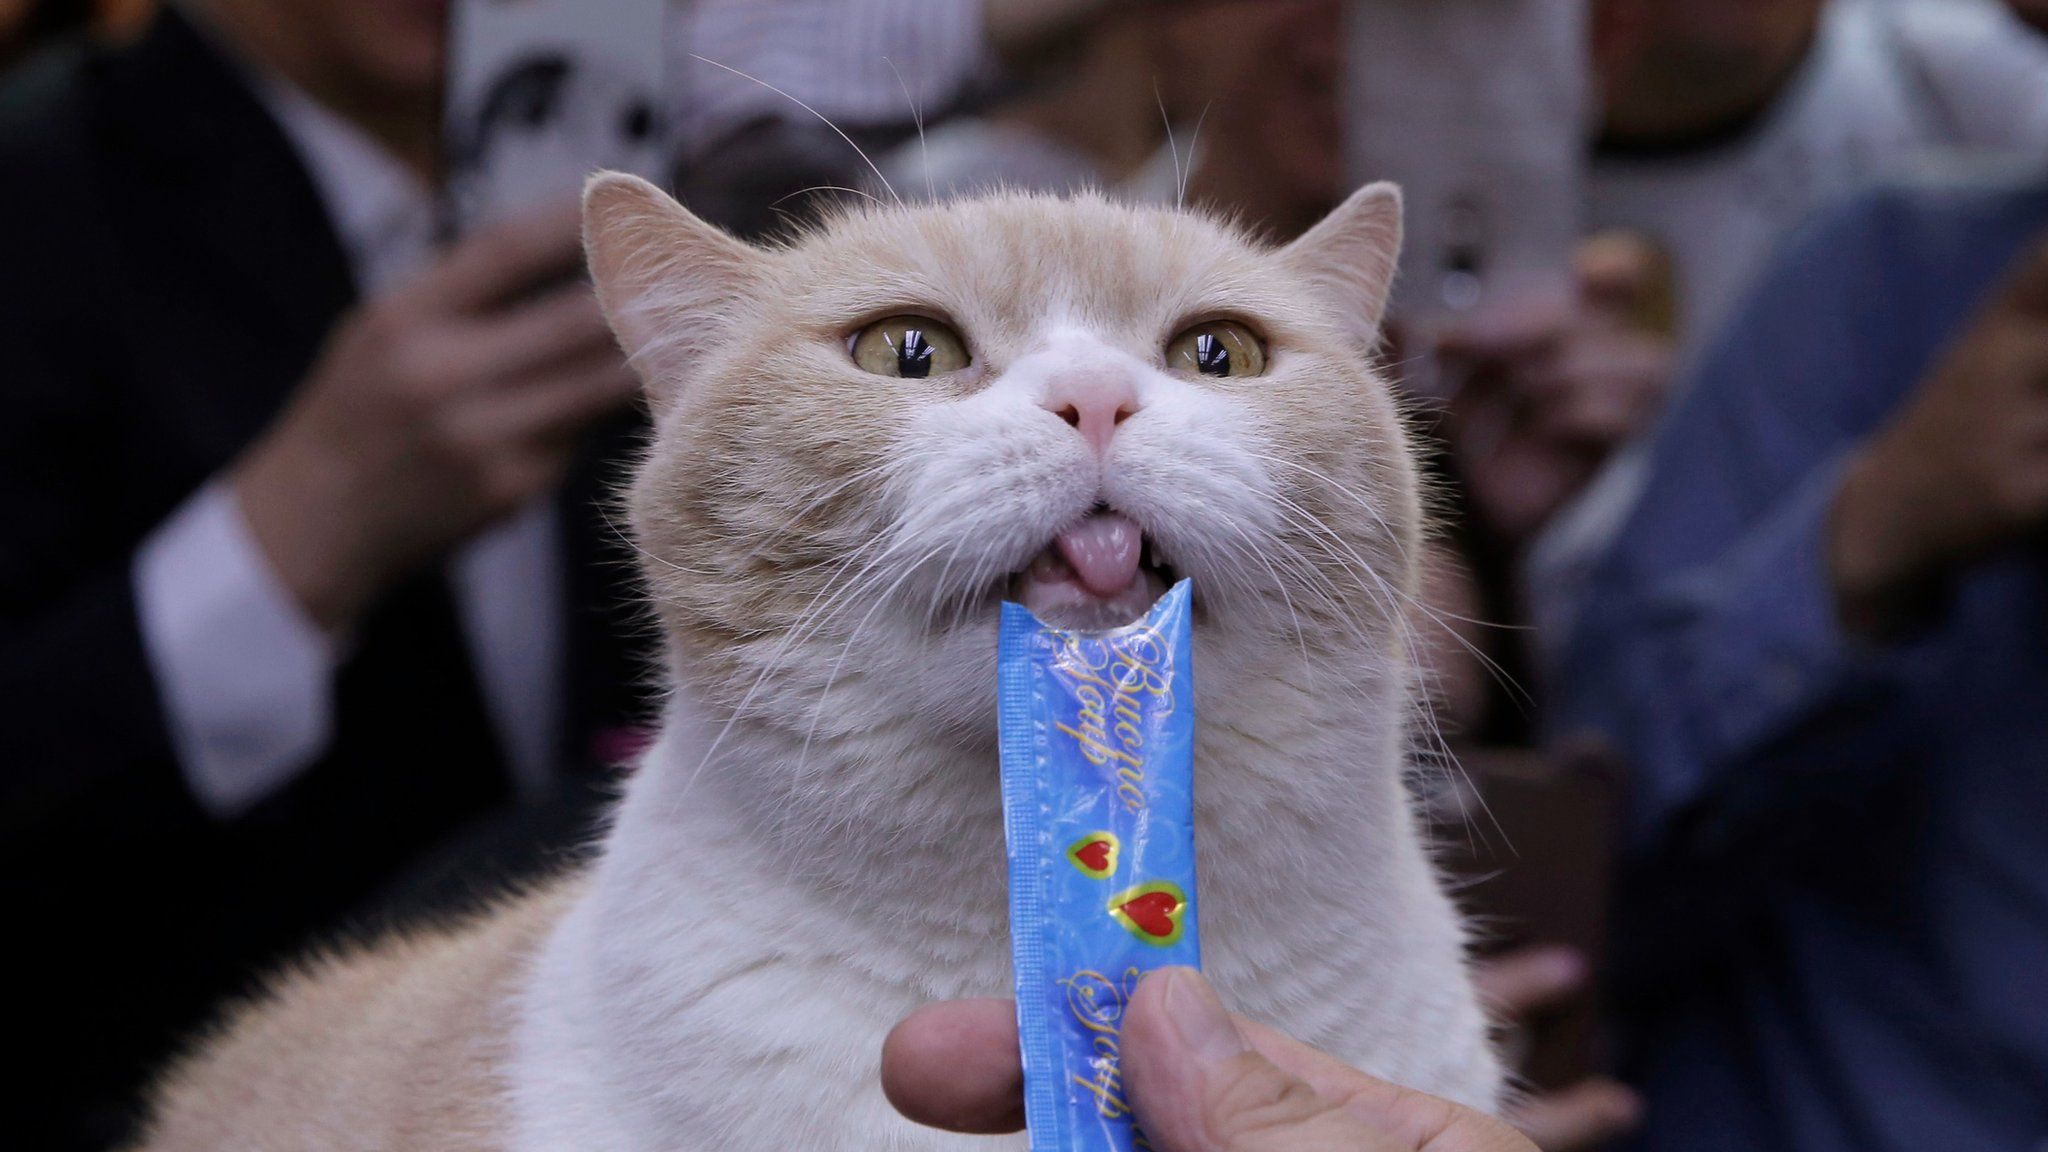 Hong Kong celebrity cat "Brother Cream", a male British Shorthair cat, has a snack at a convenience store during the last business day of the store in Hong Kong, Wednesday, May 25, 2016